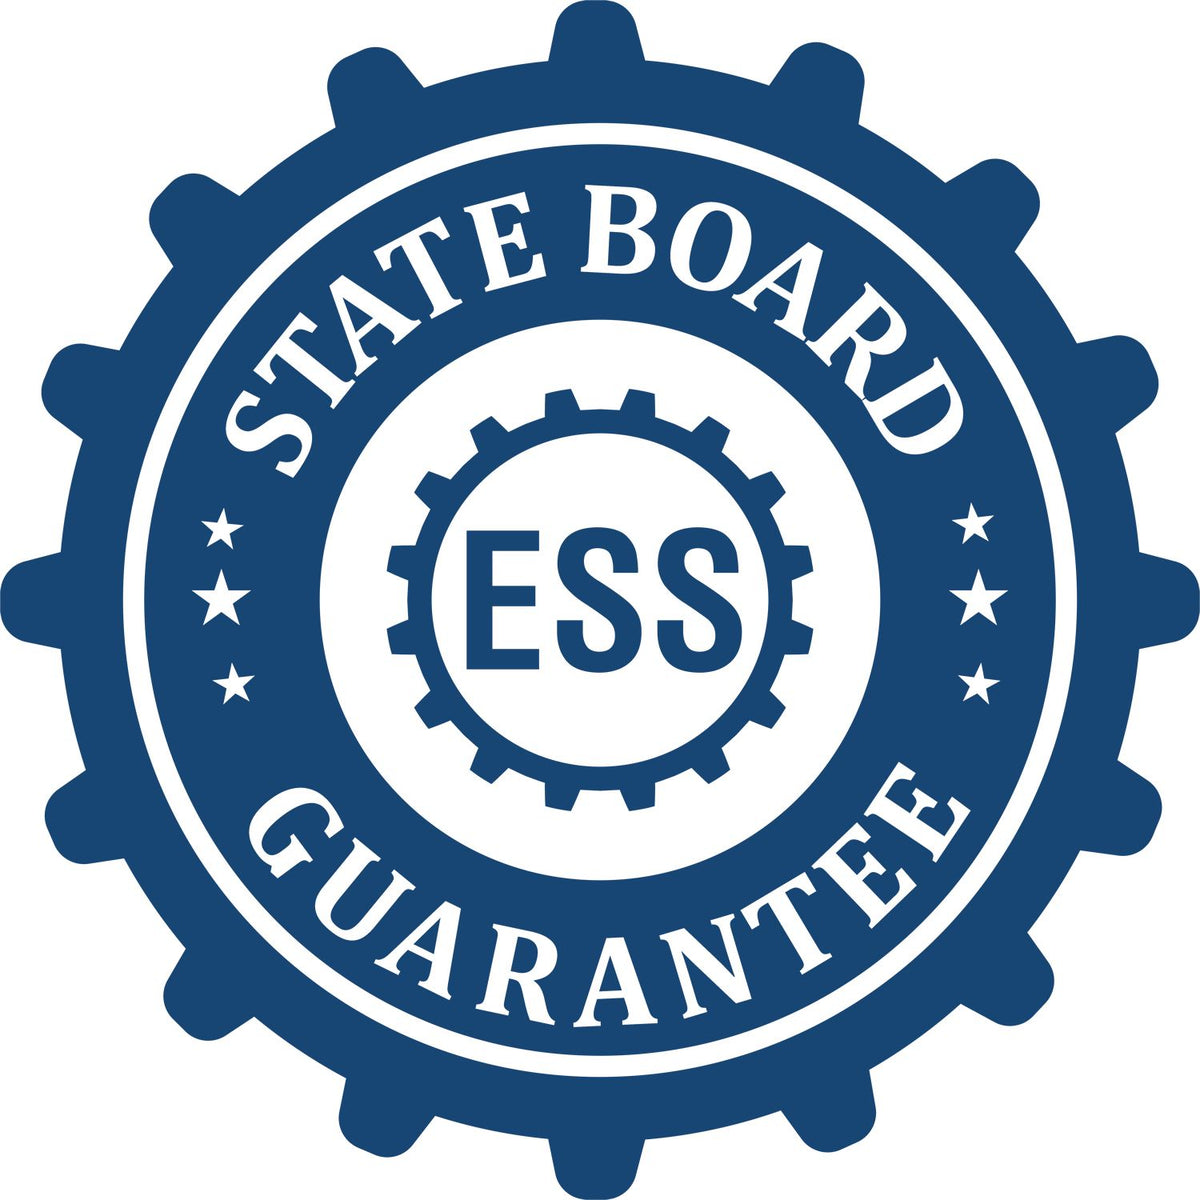 An emblem in a gear shape illustrating a state board guarantee for the Gift Louisiana Landscape Architect Seal